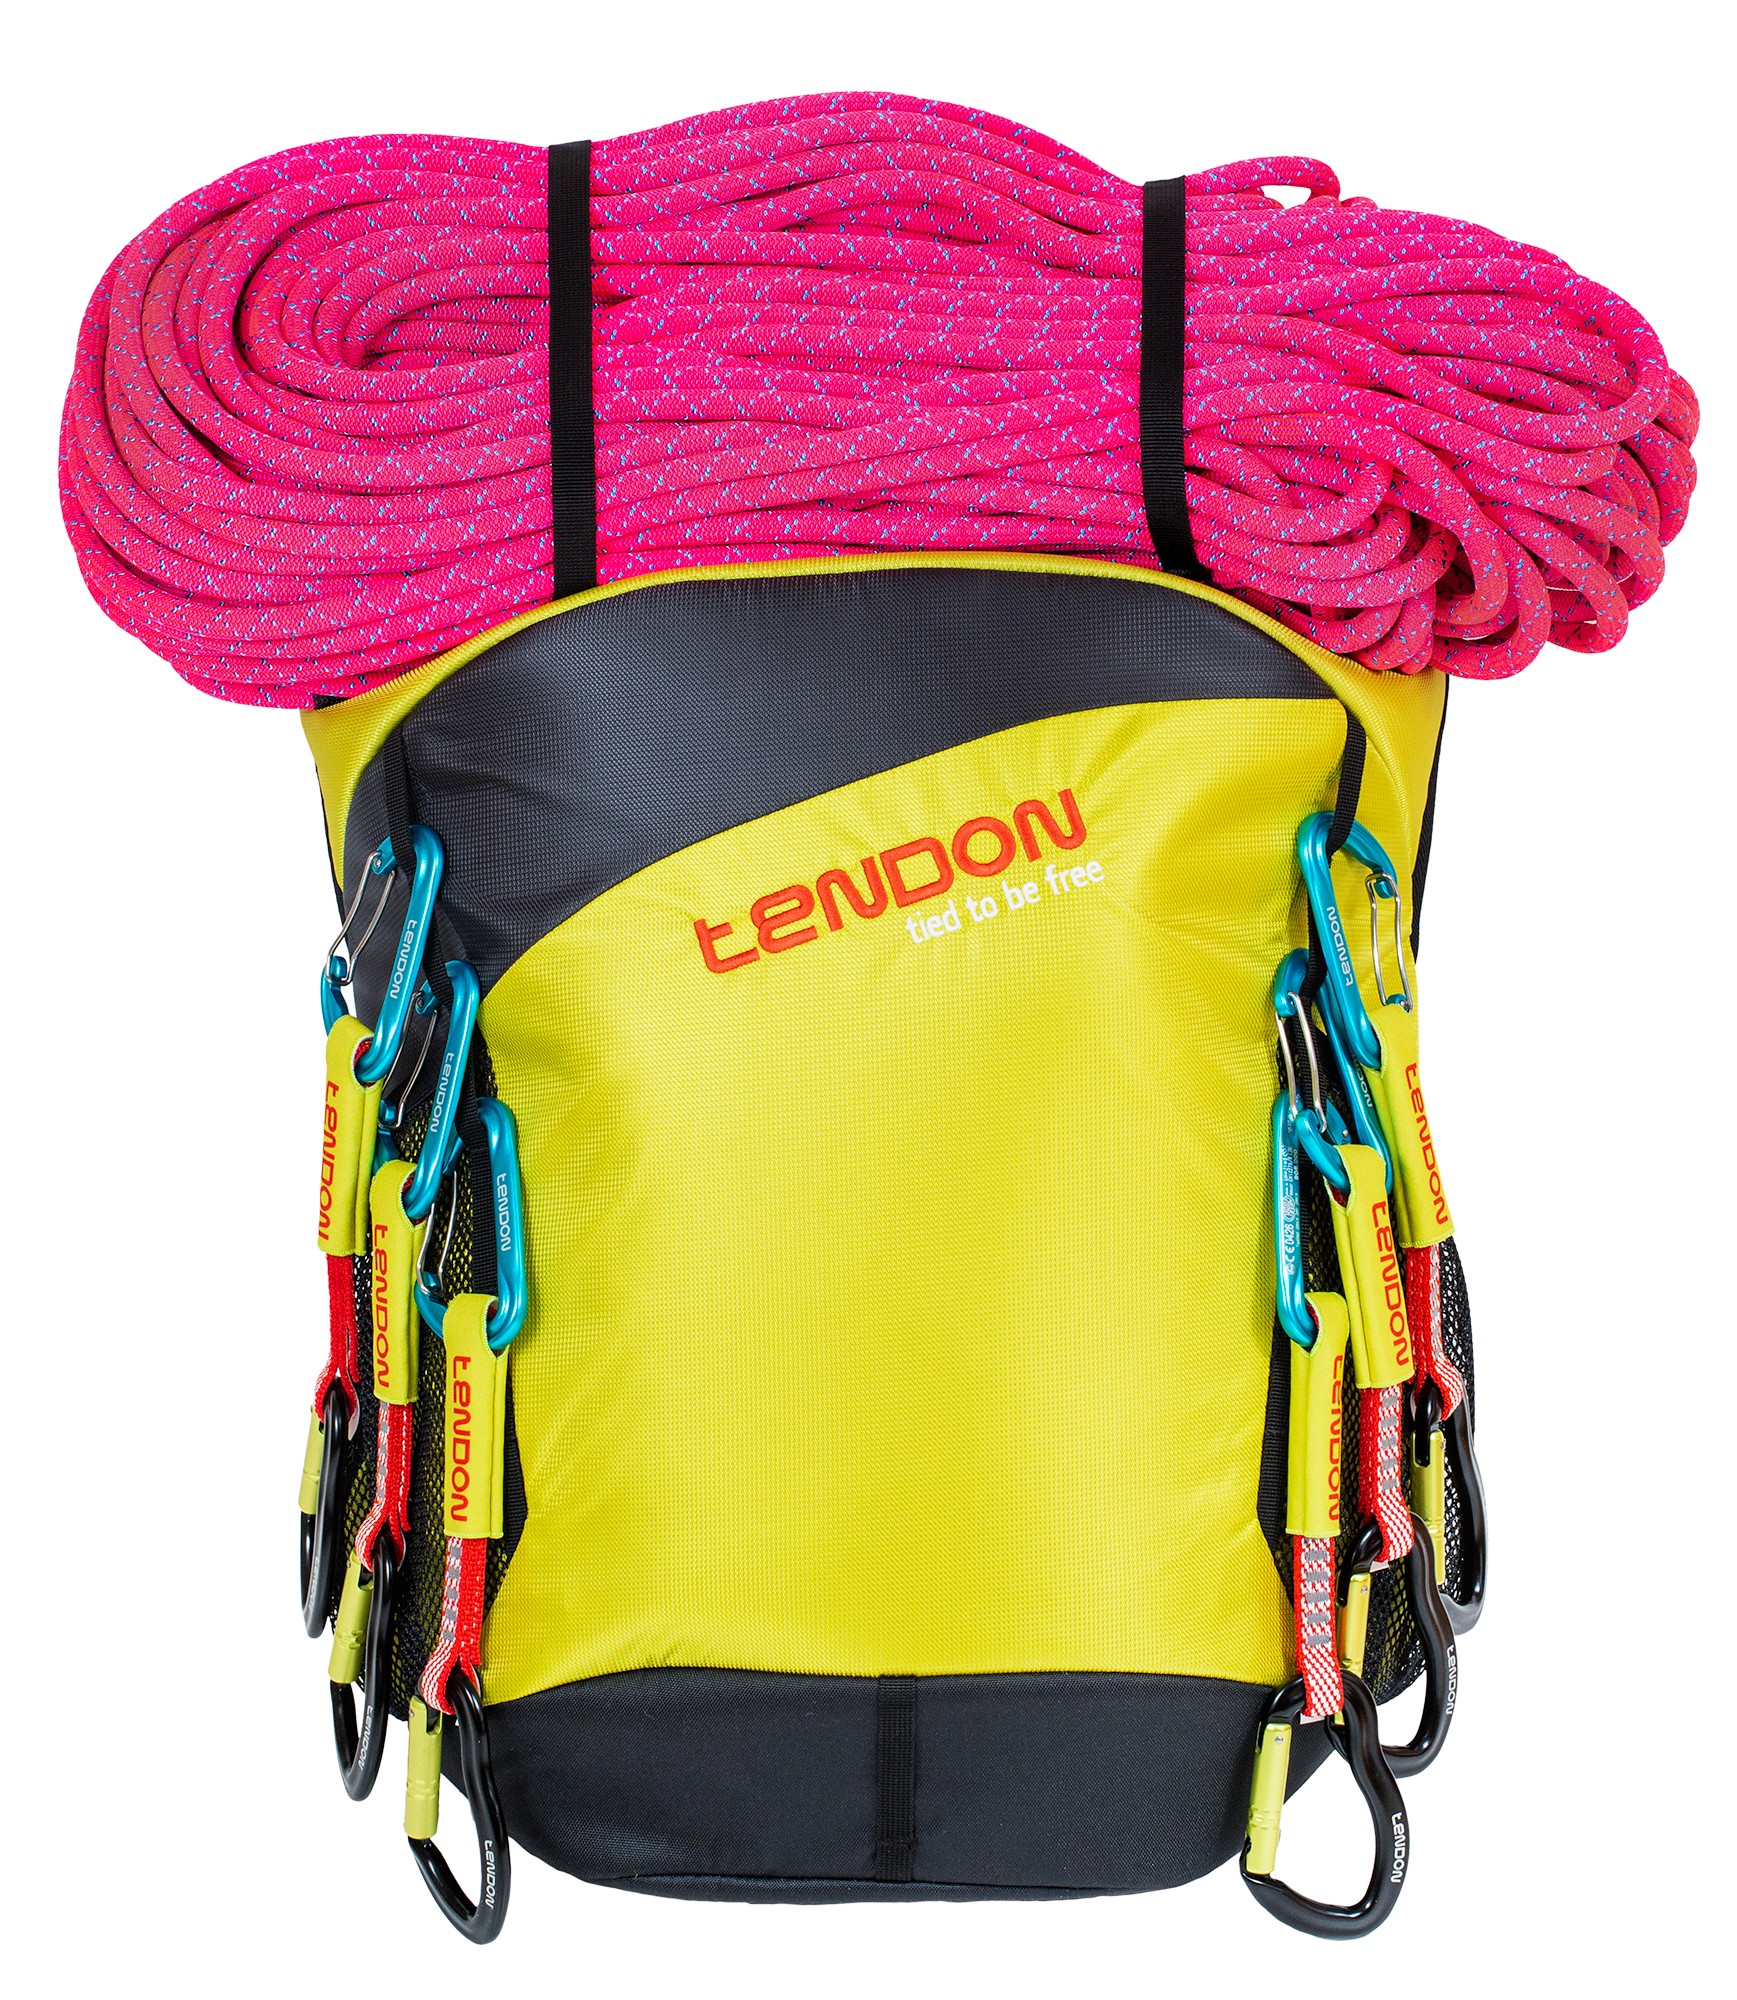 How to carry the rope to rocks or to the gym? TENDON Gear Bag may be the  solution!